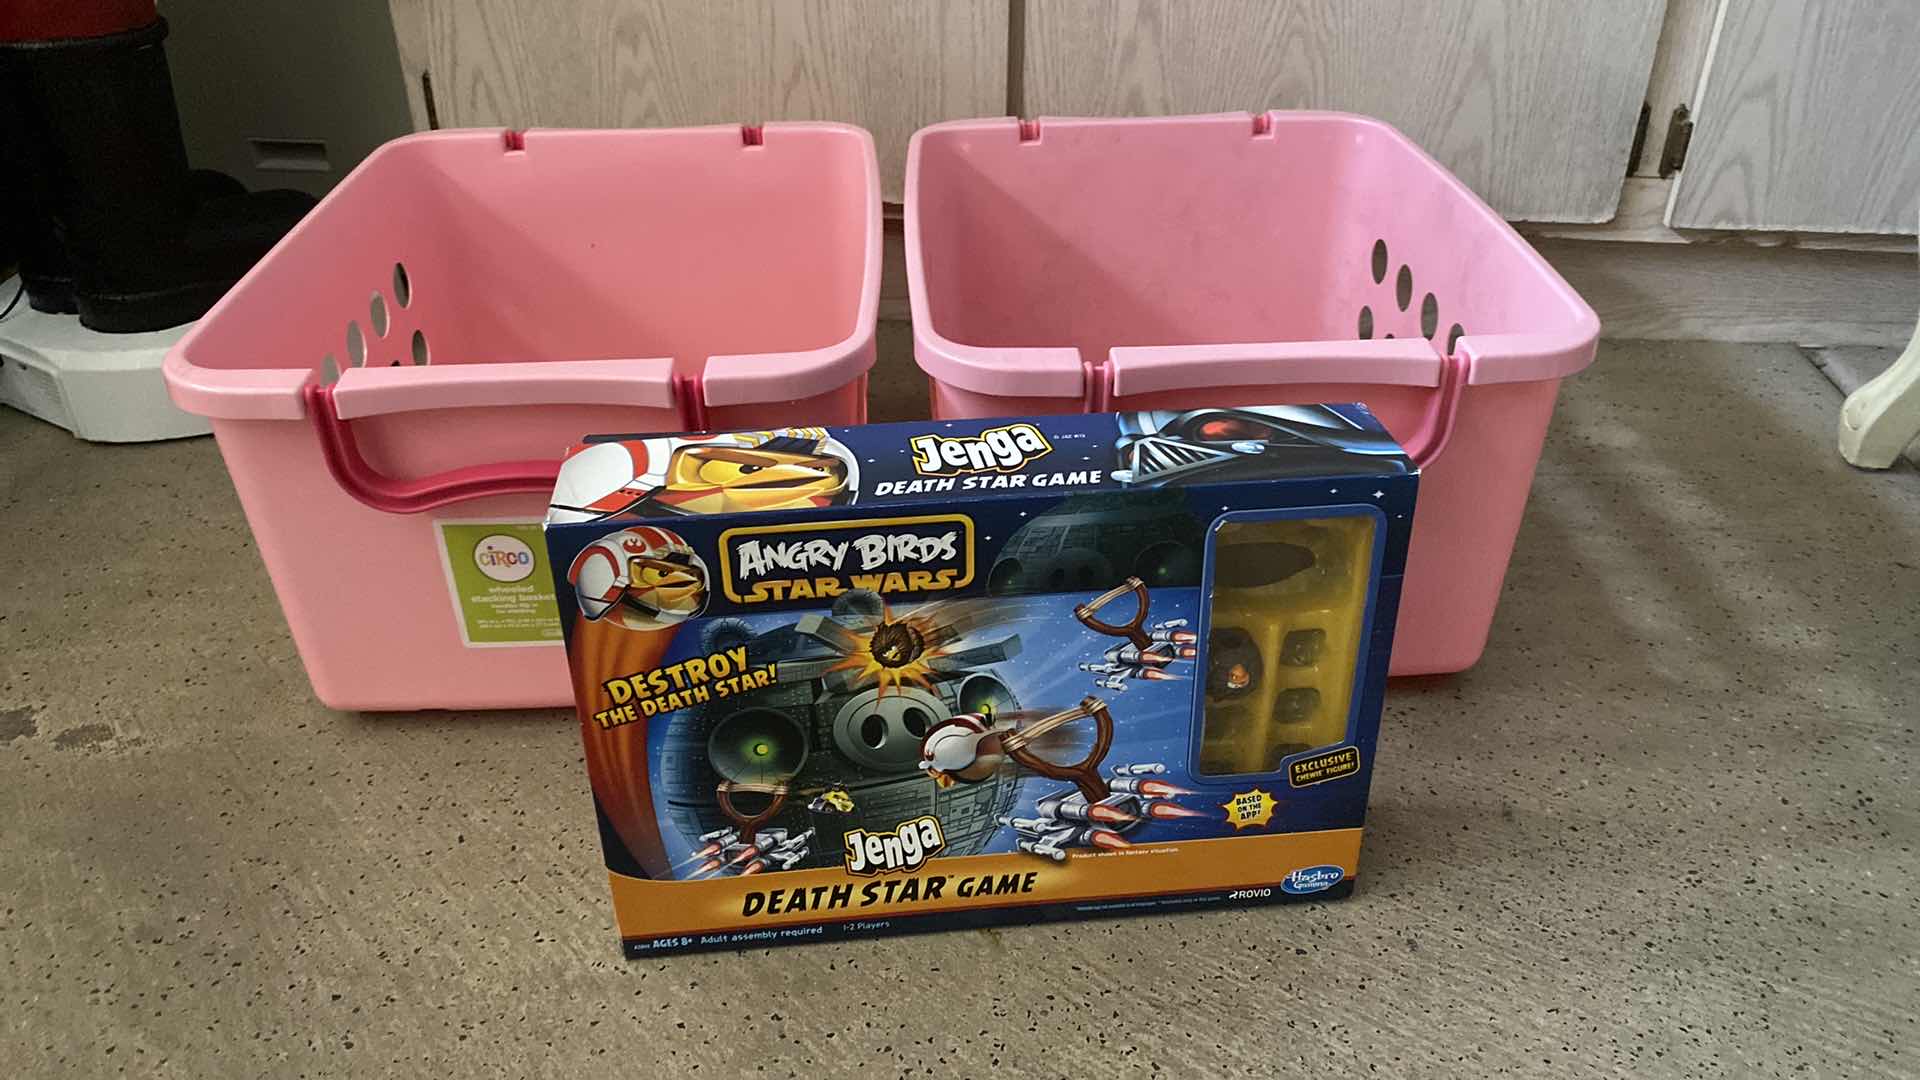 Photo 1 of PAIR OF PLASTIC PINK TOTES WITH WHEELS 20” x 16” H 10 1/2” AND ANGRY BIRDS GAME - UNKNOWN IF PIECES MISSING